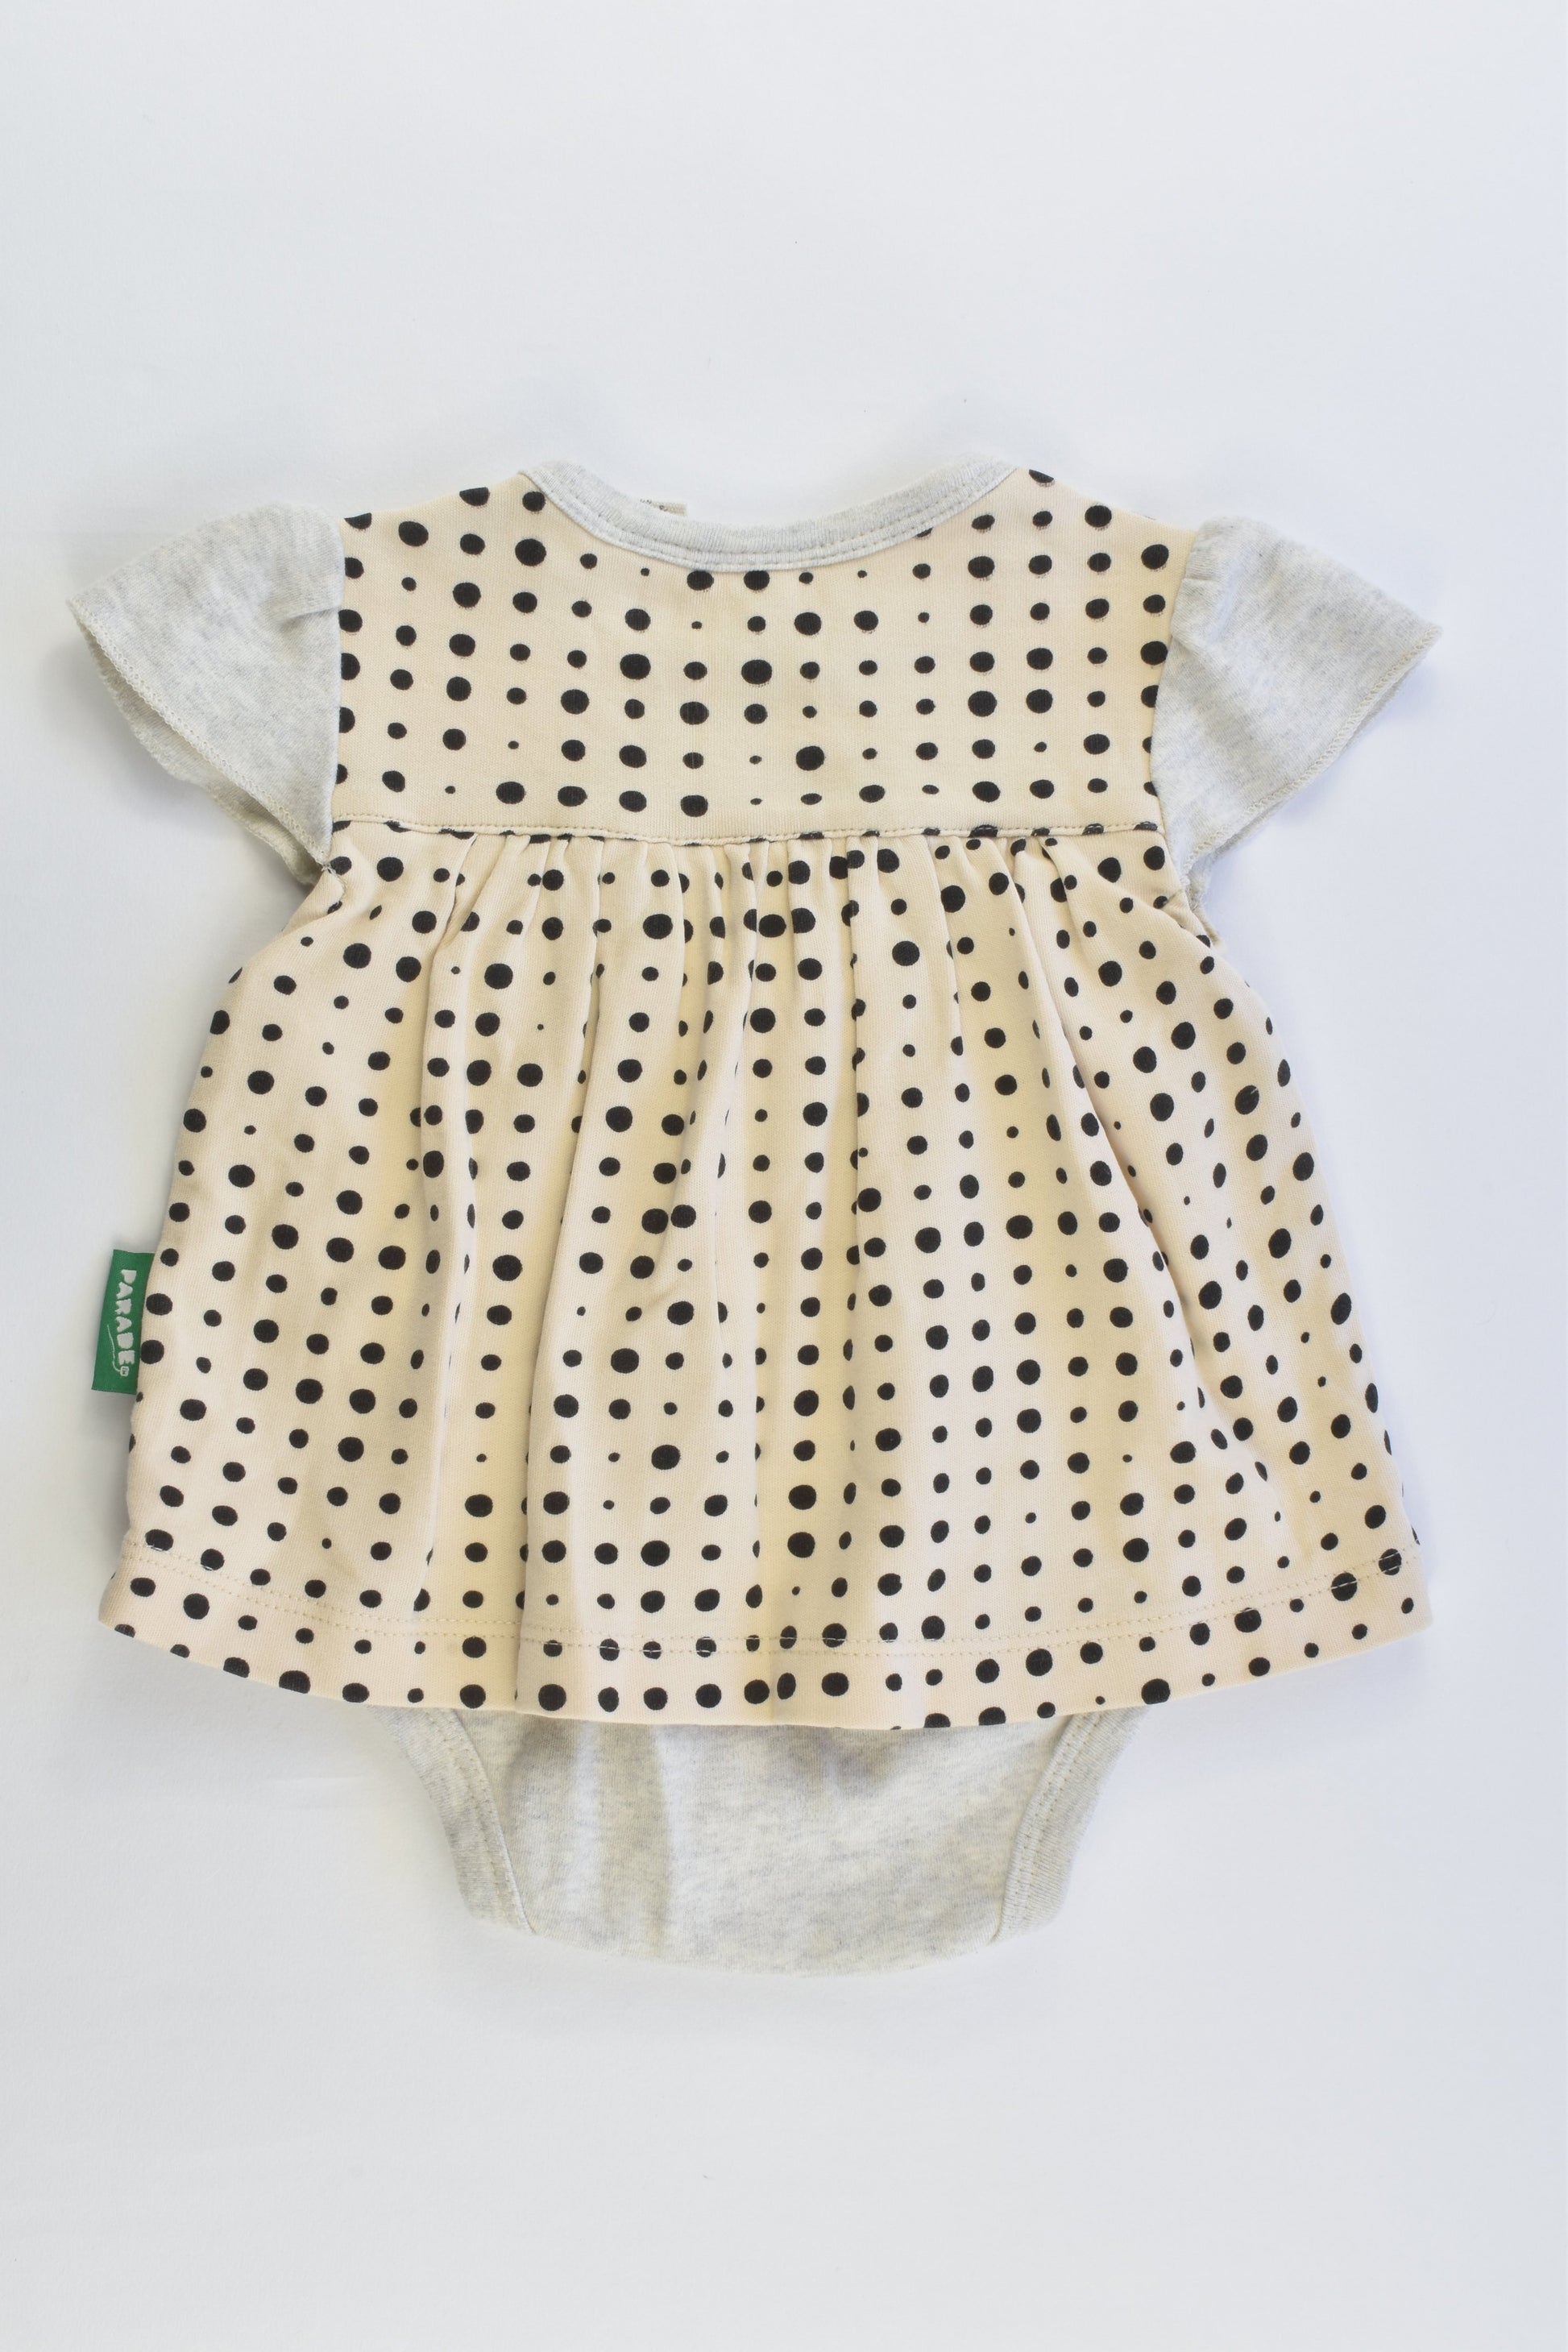 Parade Size 00 (3-6 months) Organic Dress with Bodysuit Underneath